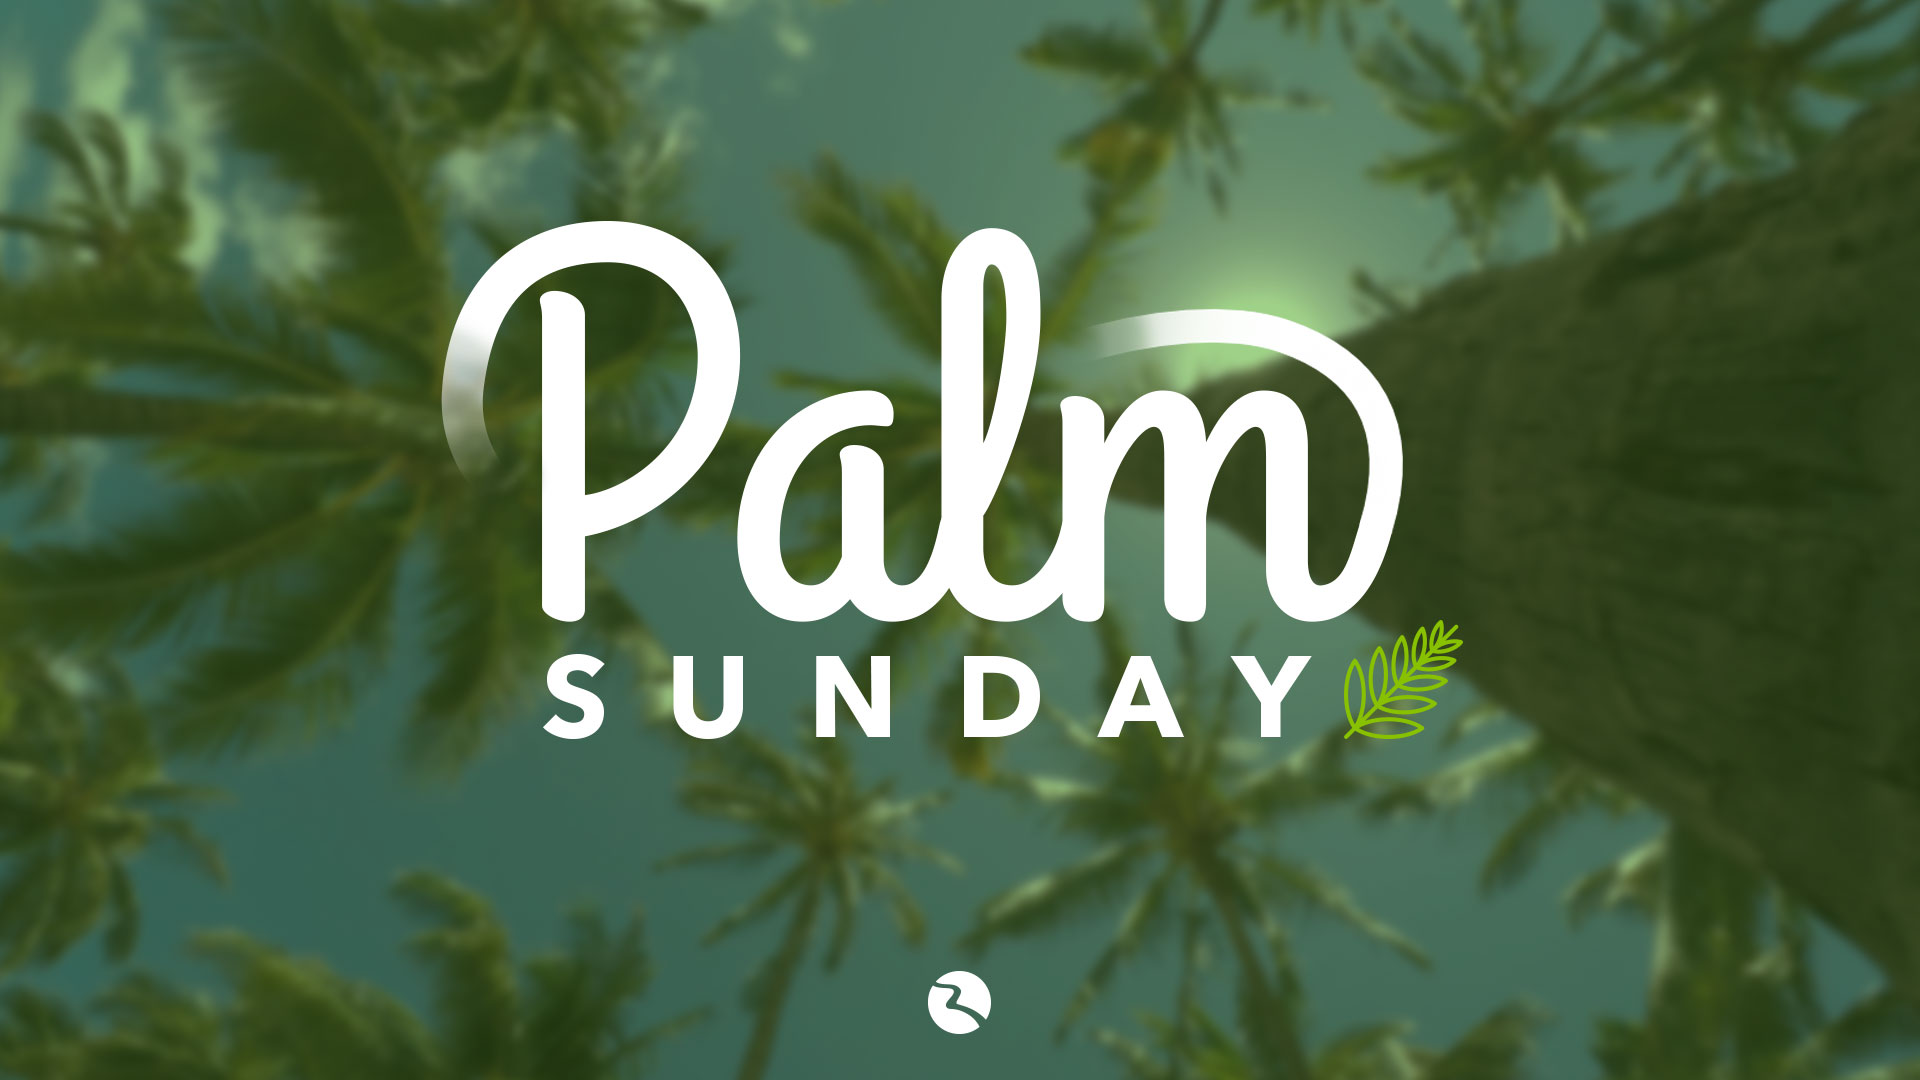 Palm Sunday Images Hd - 1920x1080 Wallpaper 